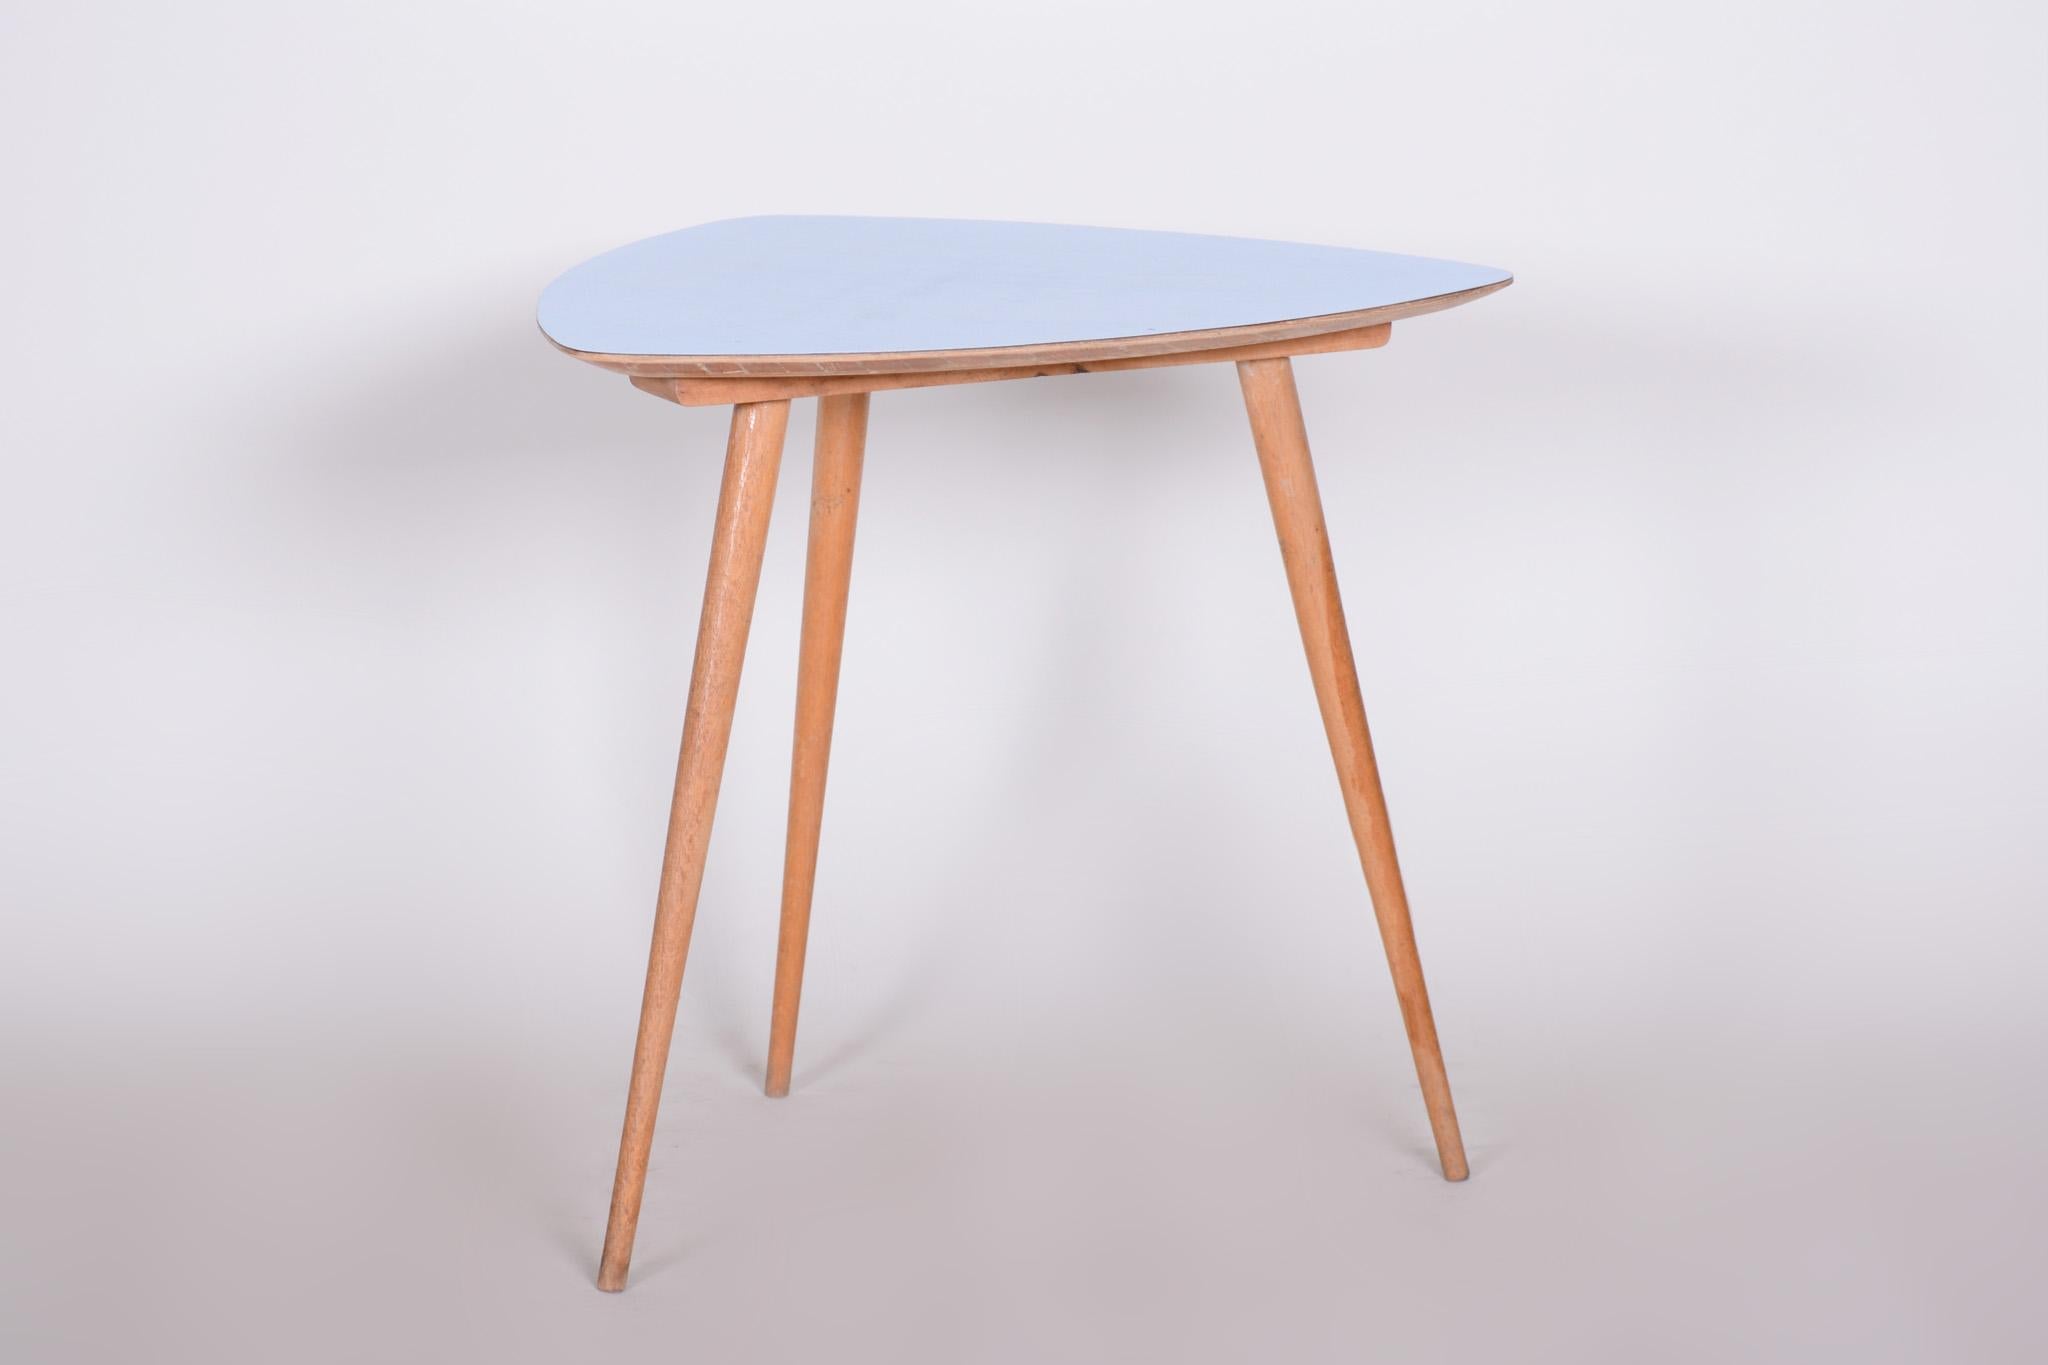 Small table.
Czech midcentury
Material: Beech
Period: 1950-1959.